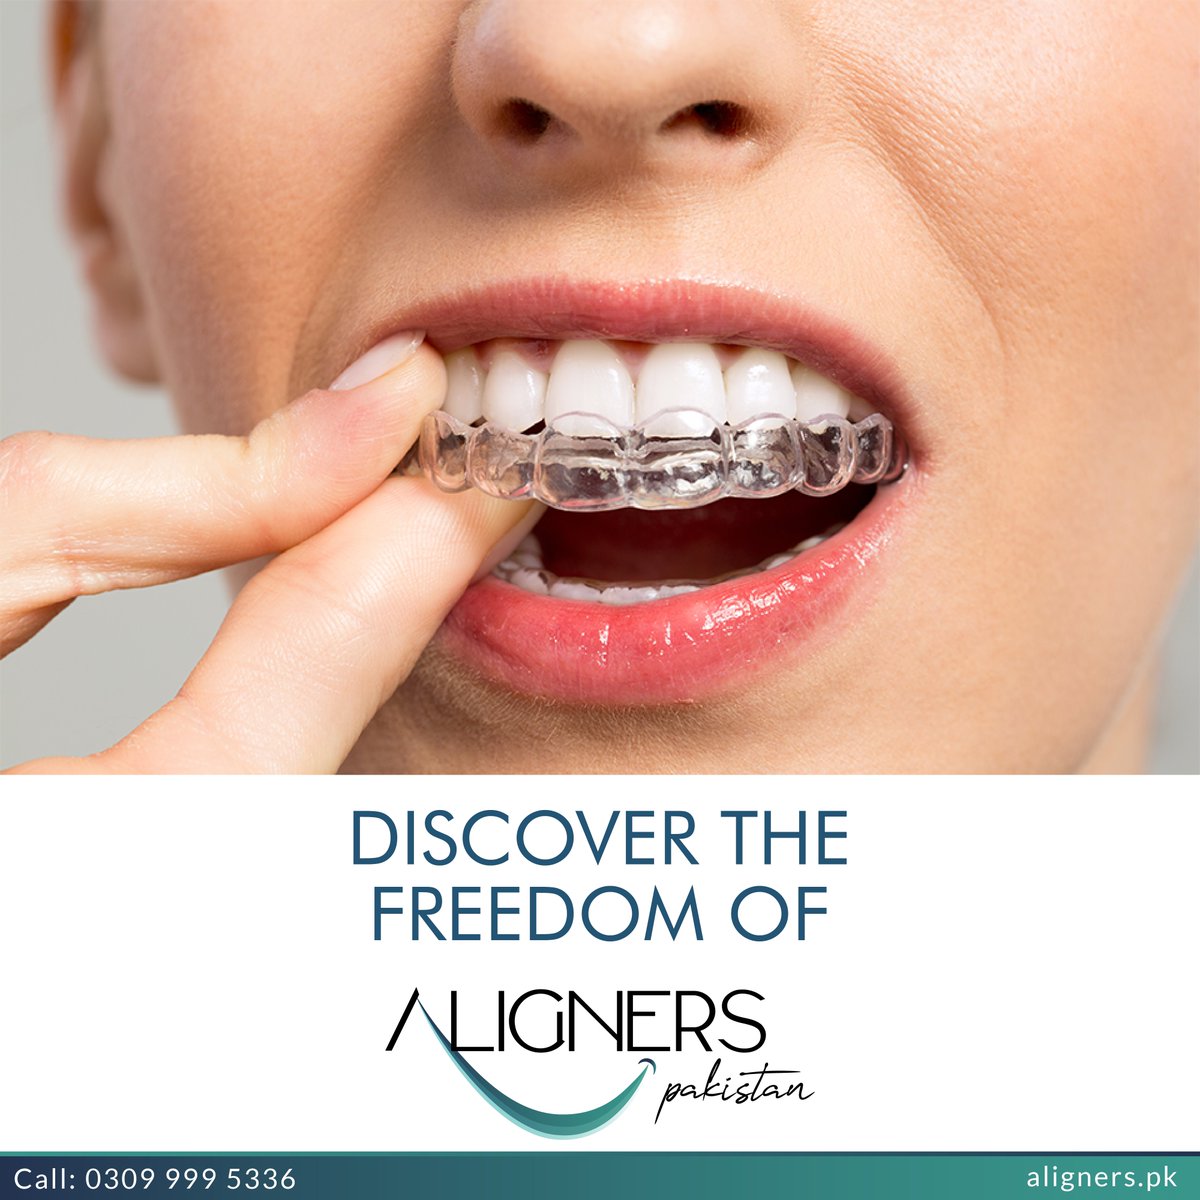 Say Goodbye to Braces, Hello to Freedom!  Call: 𝟎𝟑𝟎𝟗 𝟗𝟗𝟗 𝟓𝟑𝟑𝟔

#AlignerPakistan #Orthodontics #DentalCare #SmileTransformation #smile #braces #dentist #dentistry #teeth #clearaligners #dental #smilemakeover #clearbraces #invisalignsmile  #invisalignjourney #dentalcare